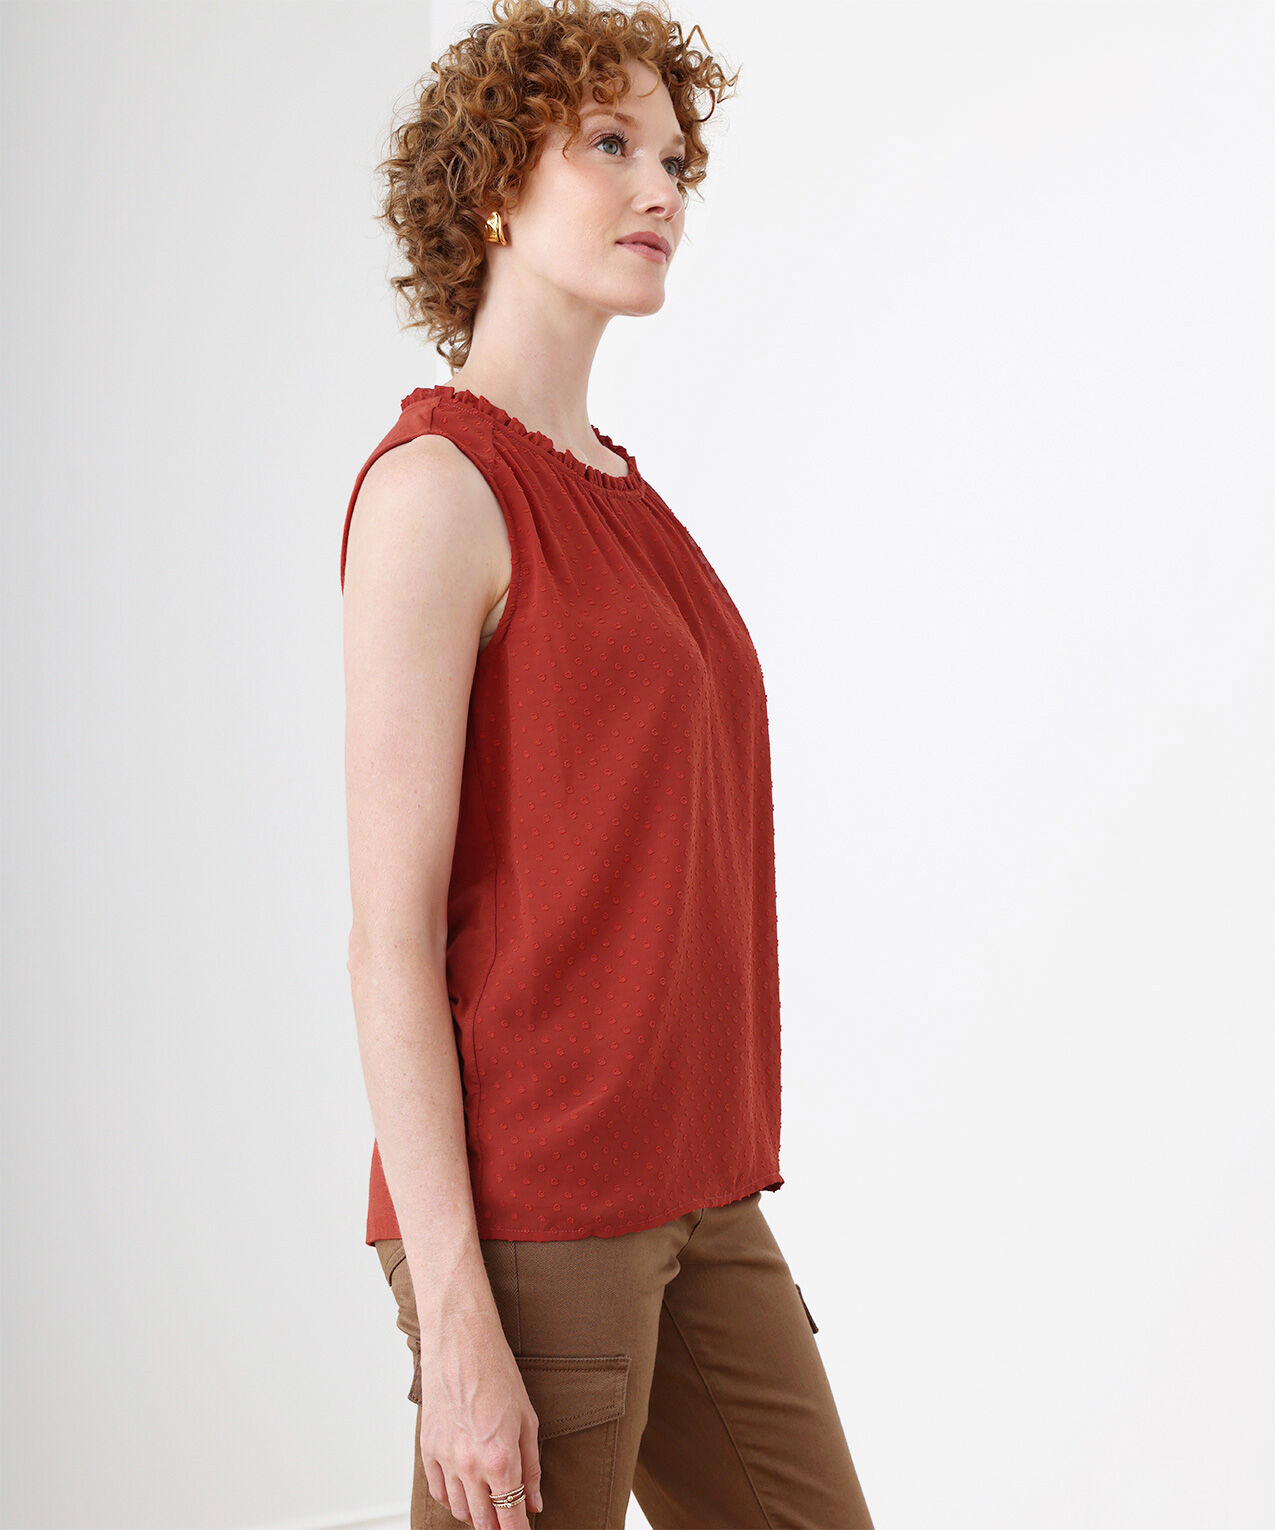 Sleeveless Woven Knit with Ruched Neck